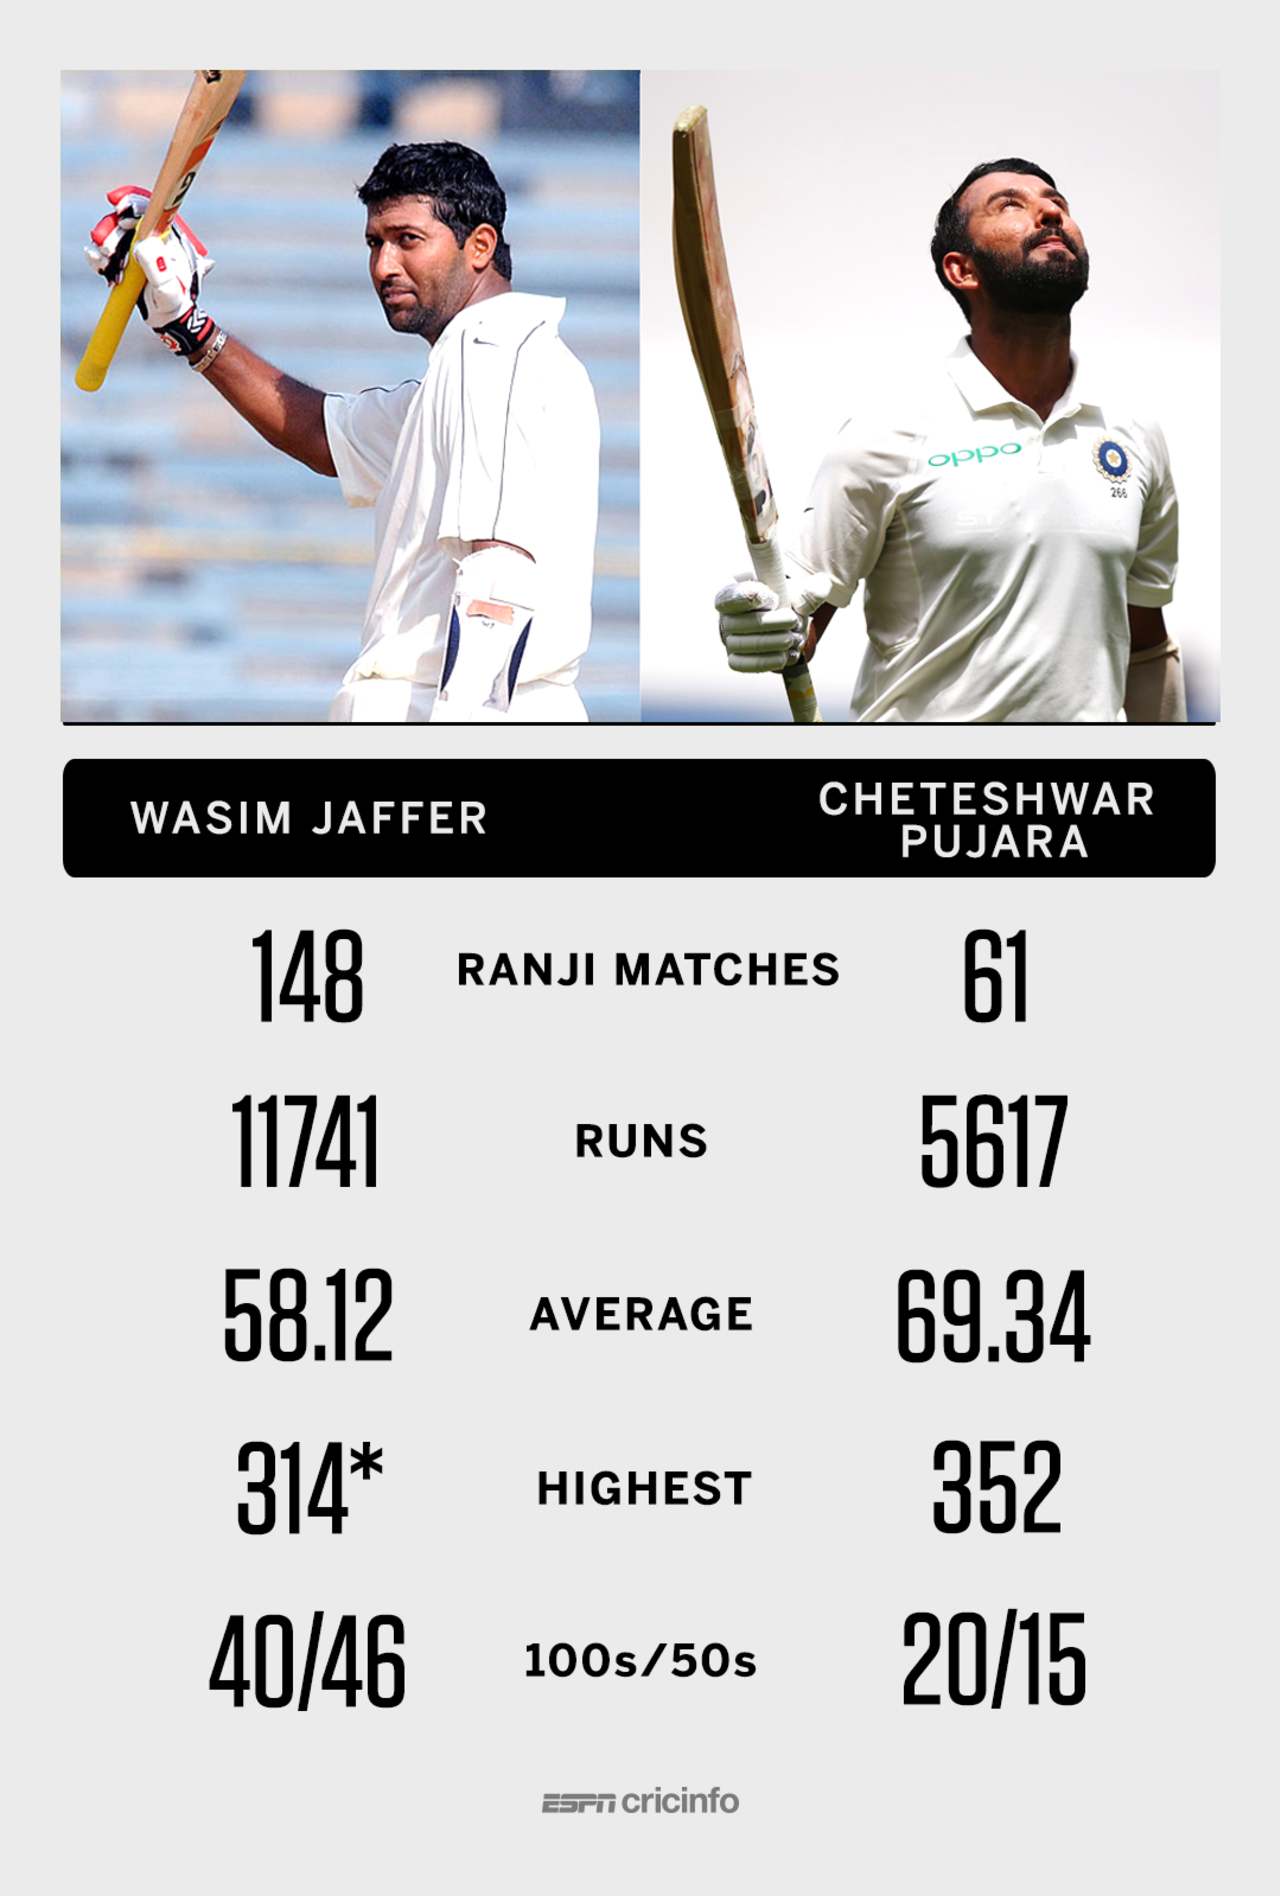 A comparison of two domestic stalwarts